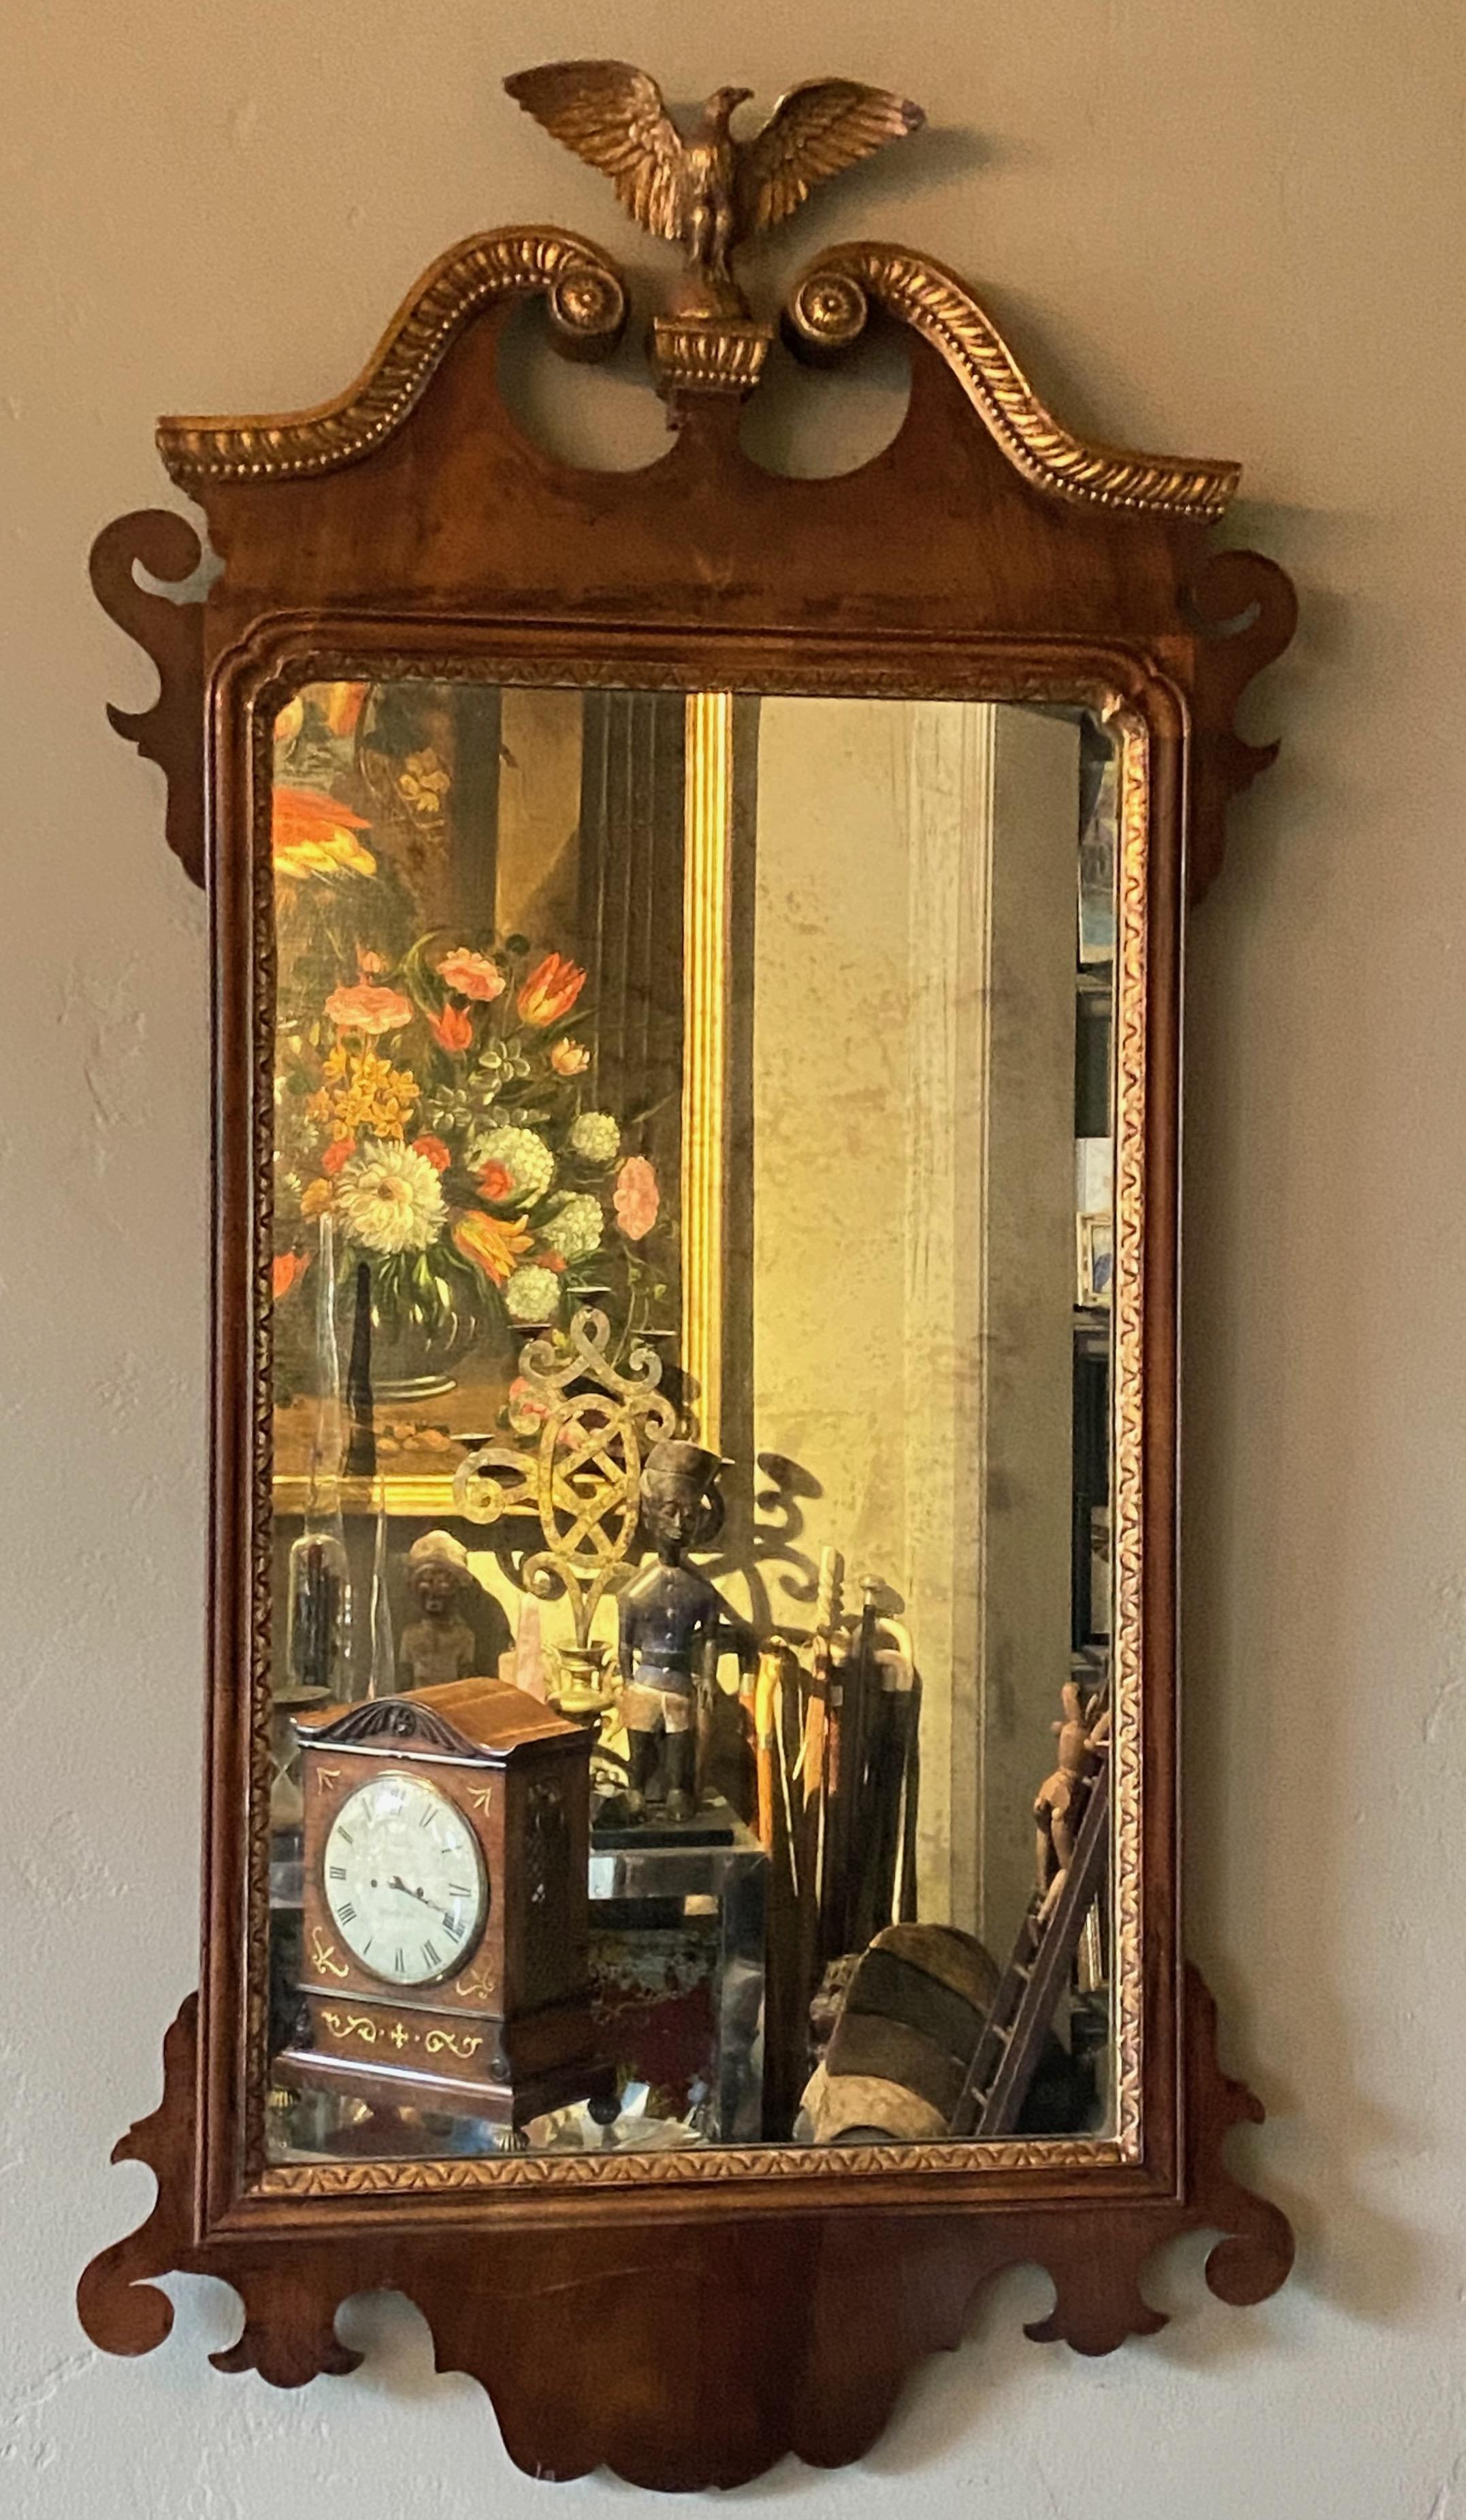 A classic American Chippendale style mahogany mirror with aged glass mirror and gilt detail.
American, early 19th century.